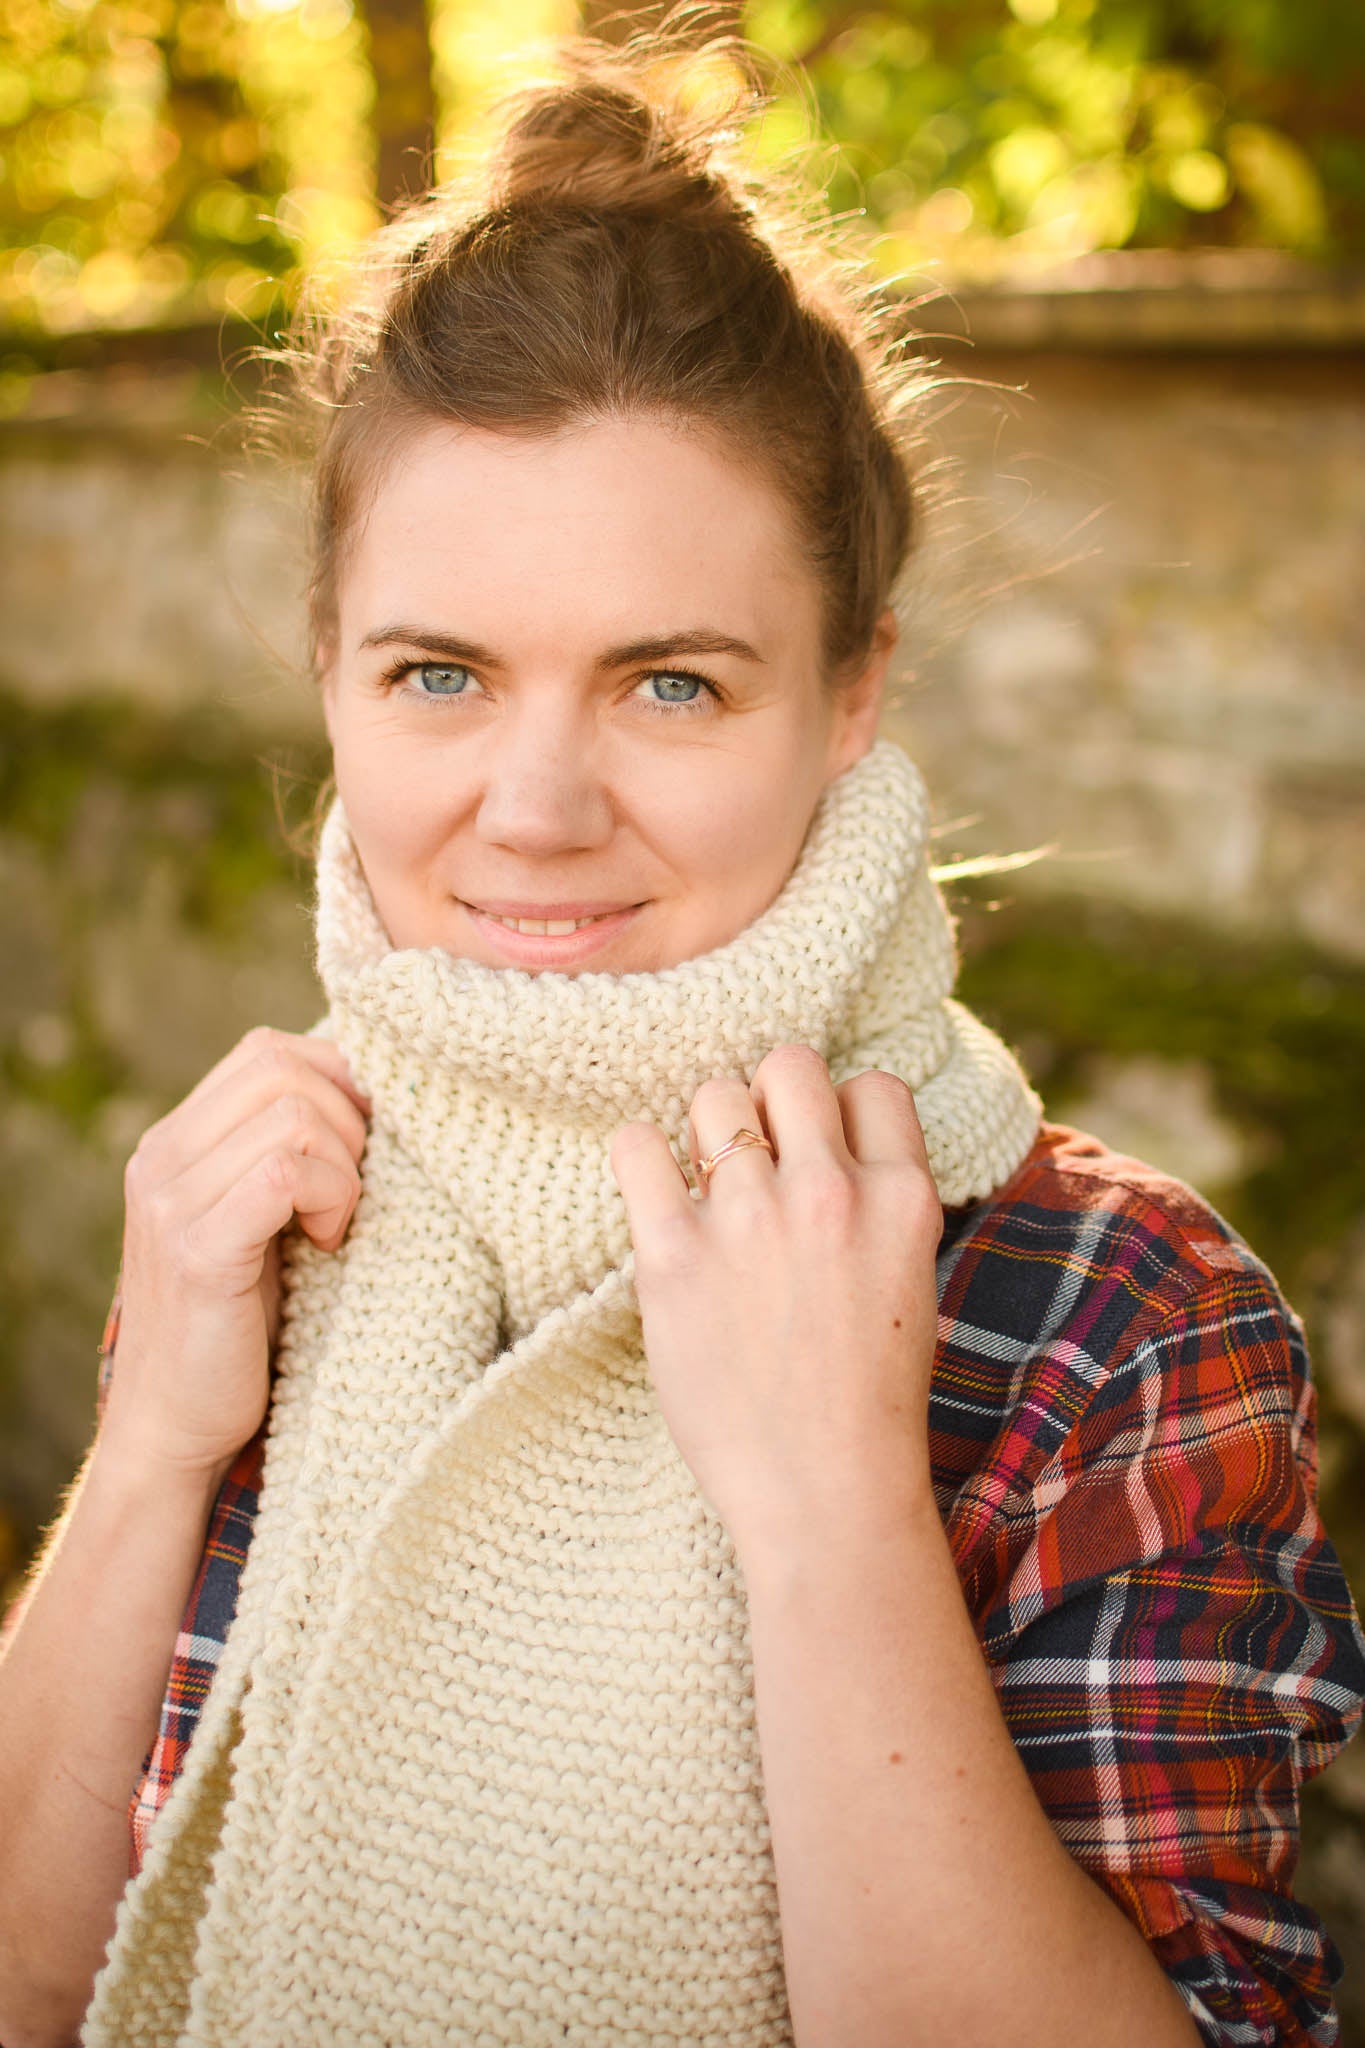 How to Knit a Scarf: A Beginners Guide to Scarf Knitting - Ysolda